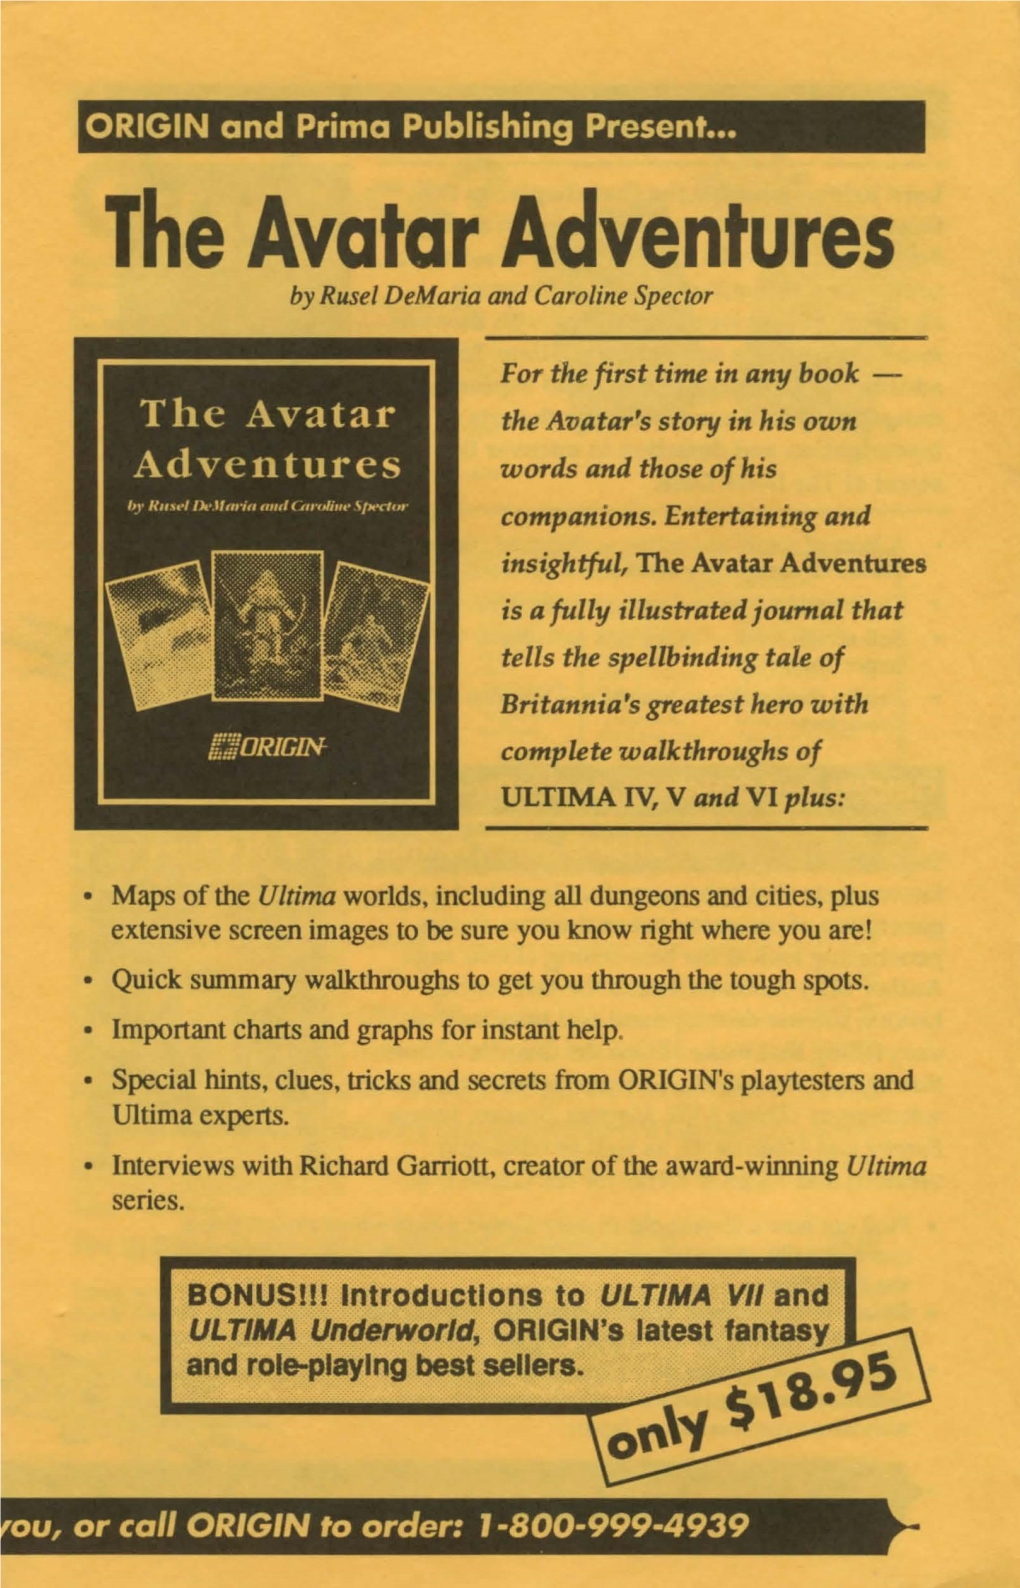 The Avatar Adventures by Ruse/ Demaria and Caroline Spector